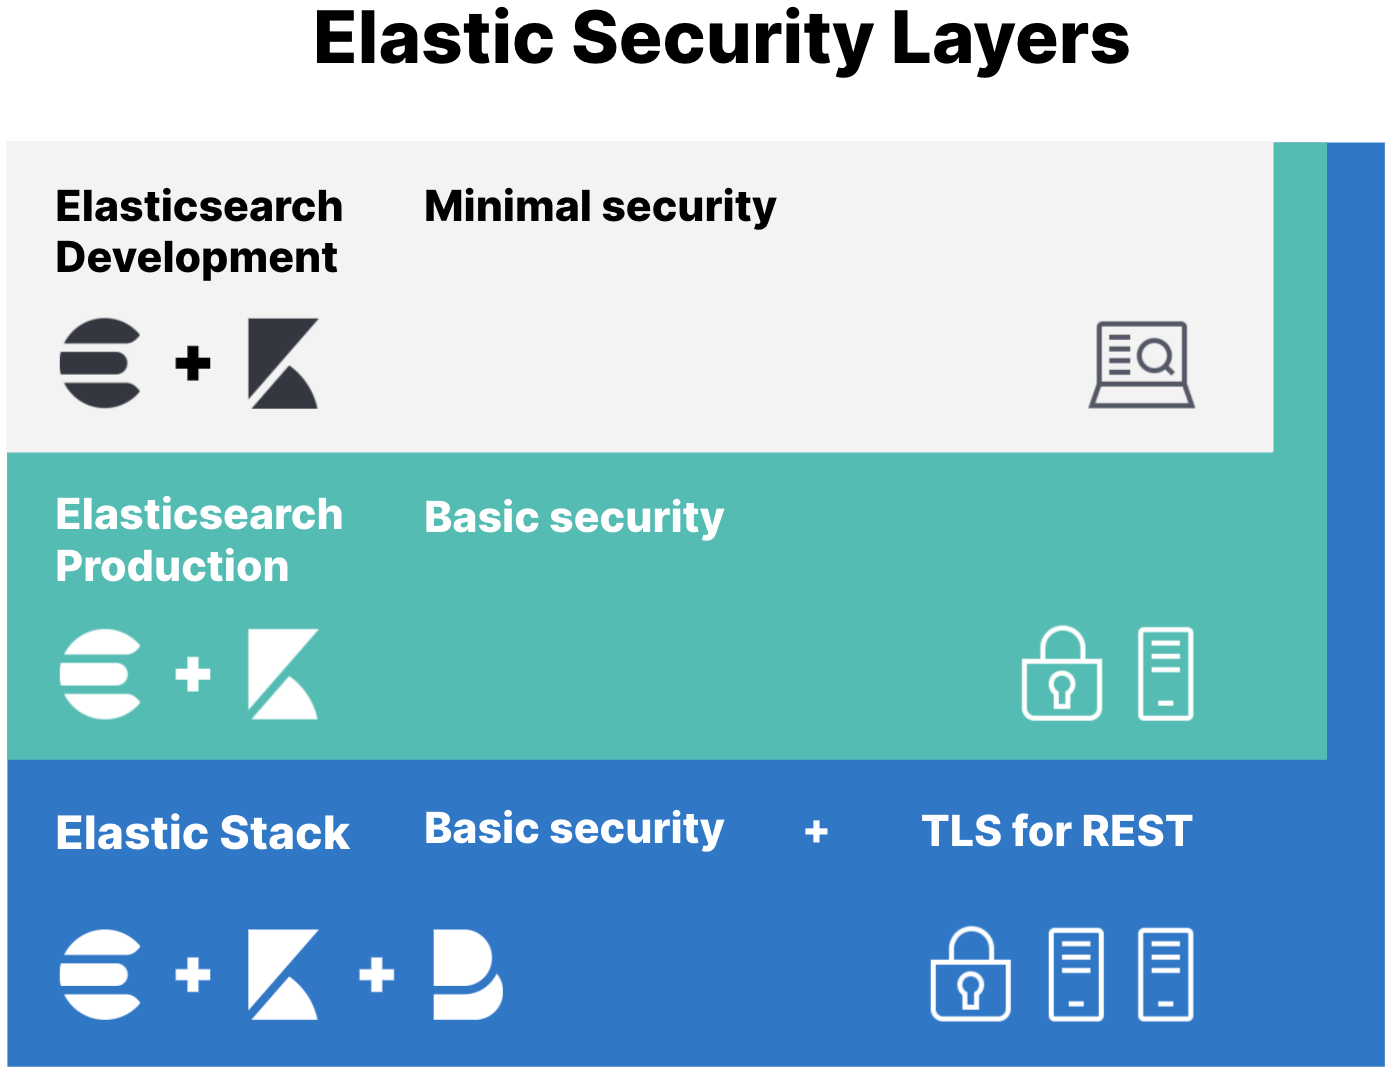 Elastic Security layers